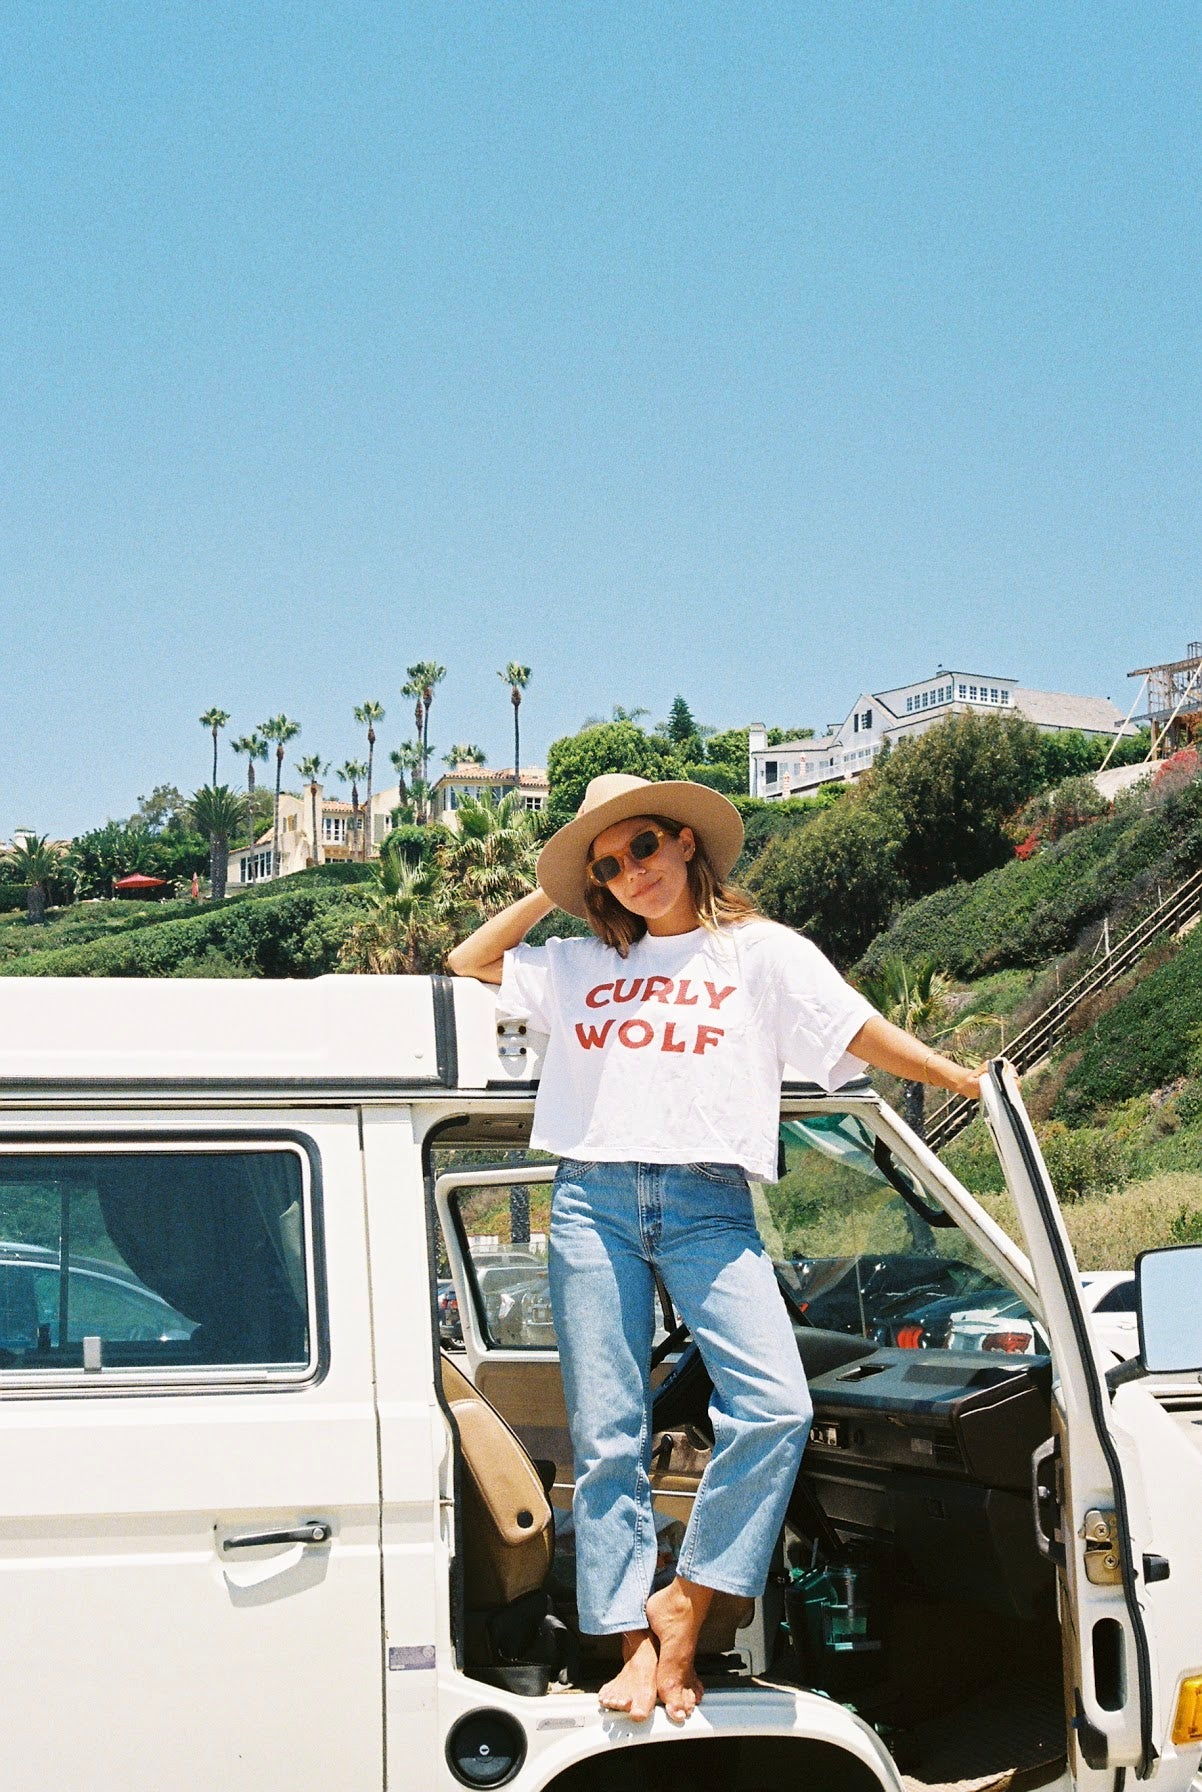 Woman standing out of the door of a Volkswagen van wearing a white cropped shirt reading “CURLY WOLF” in red